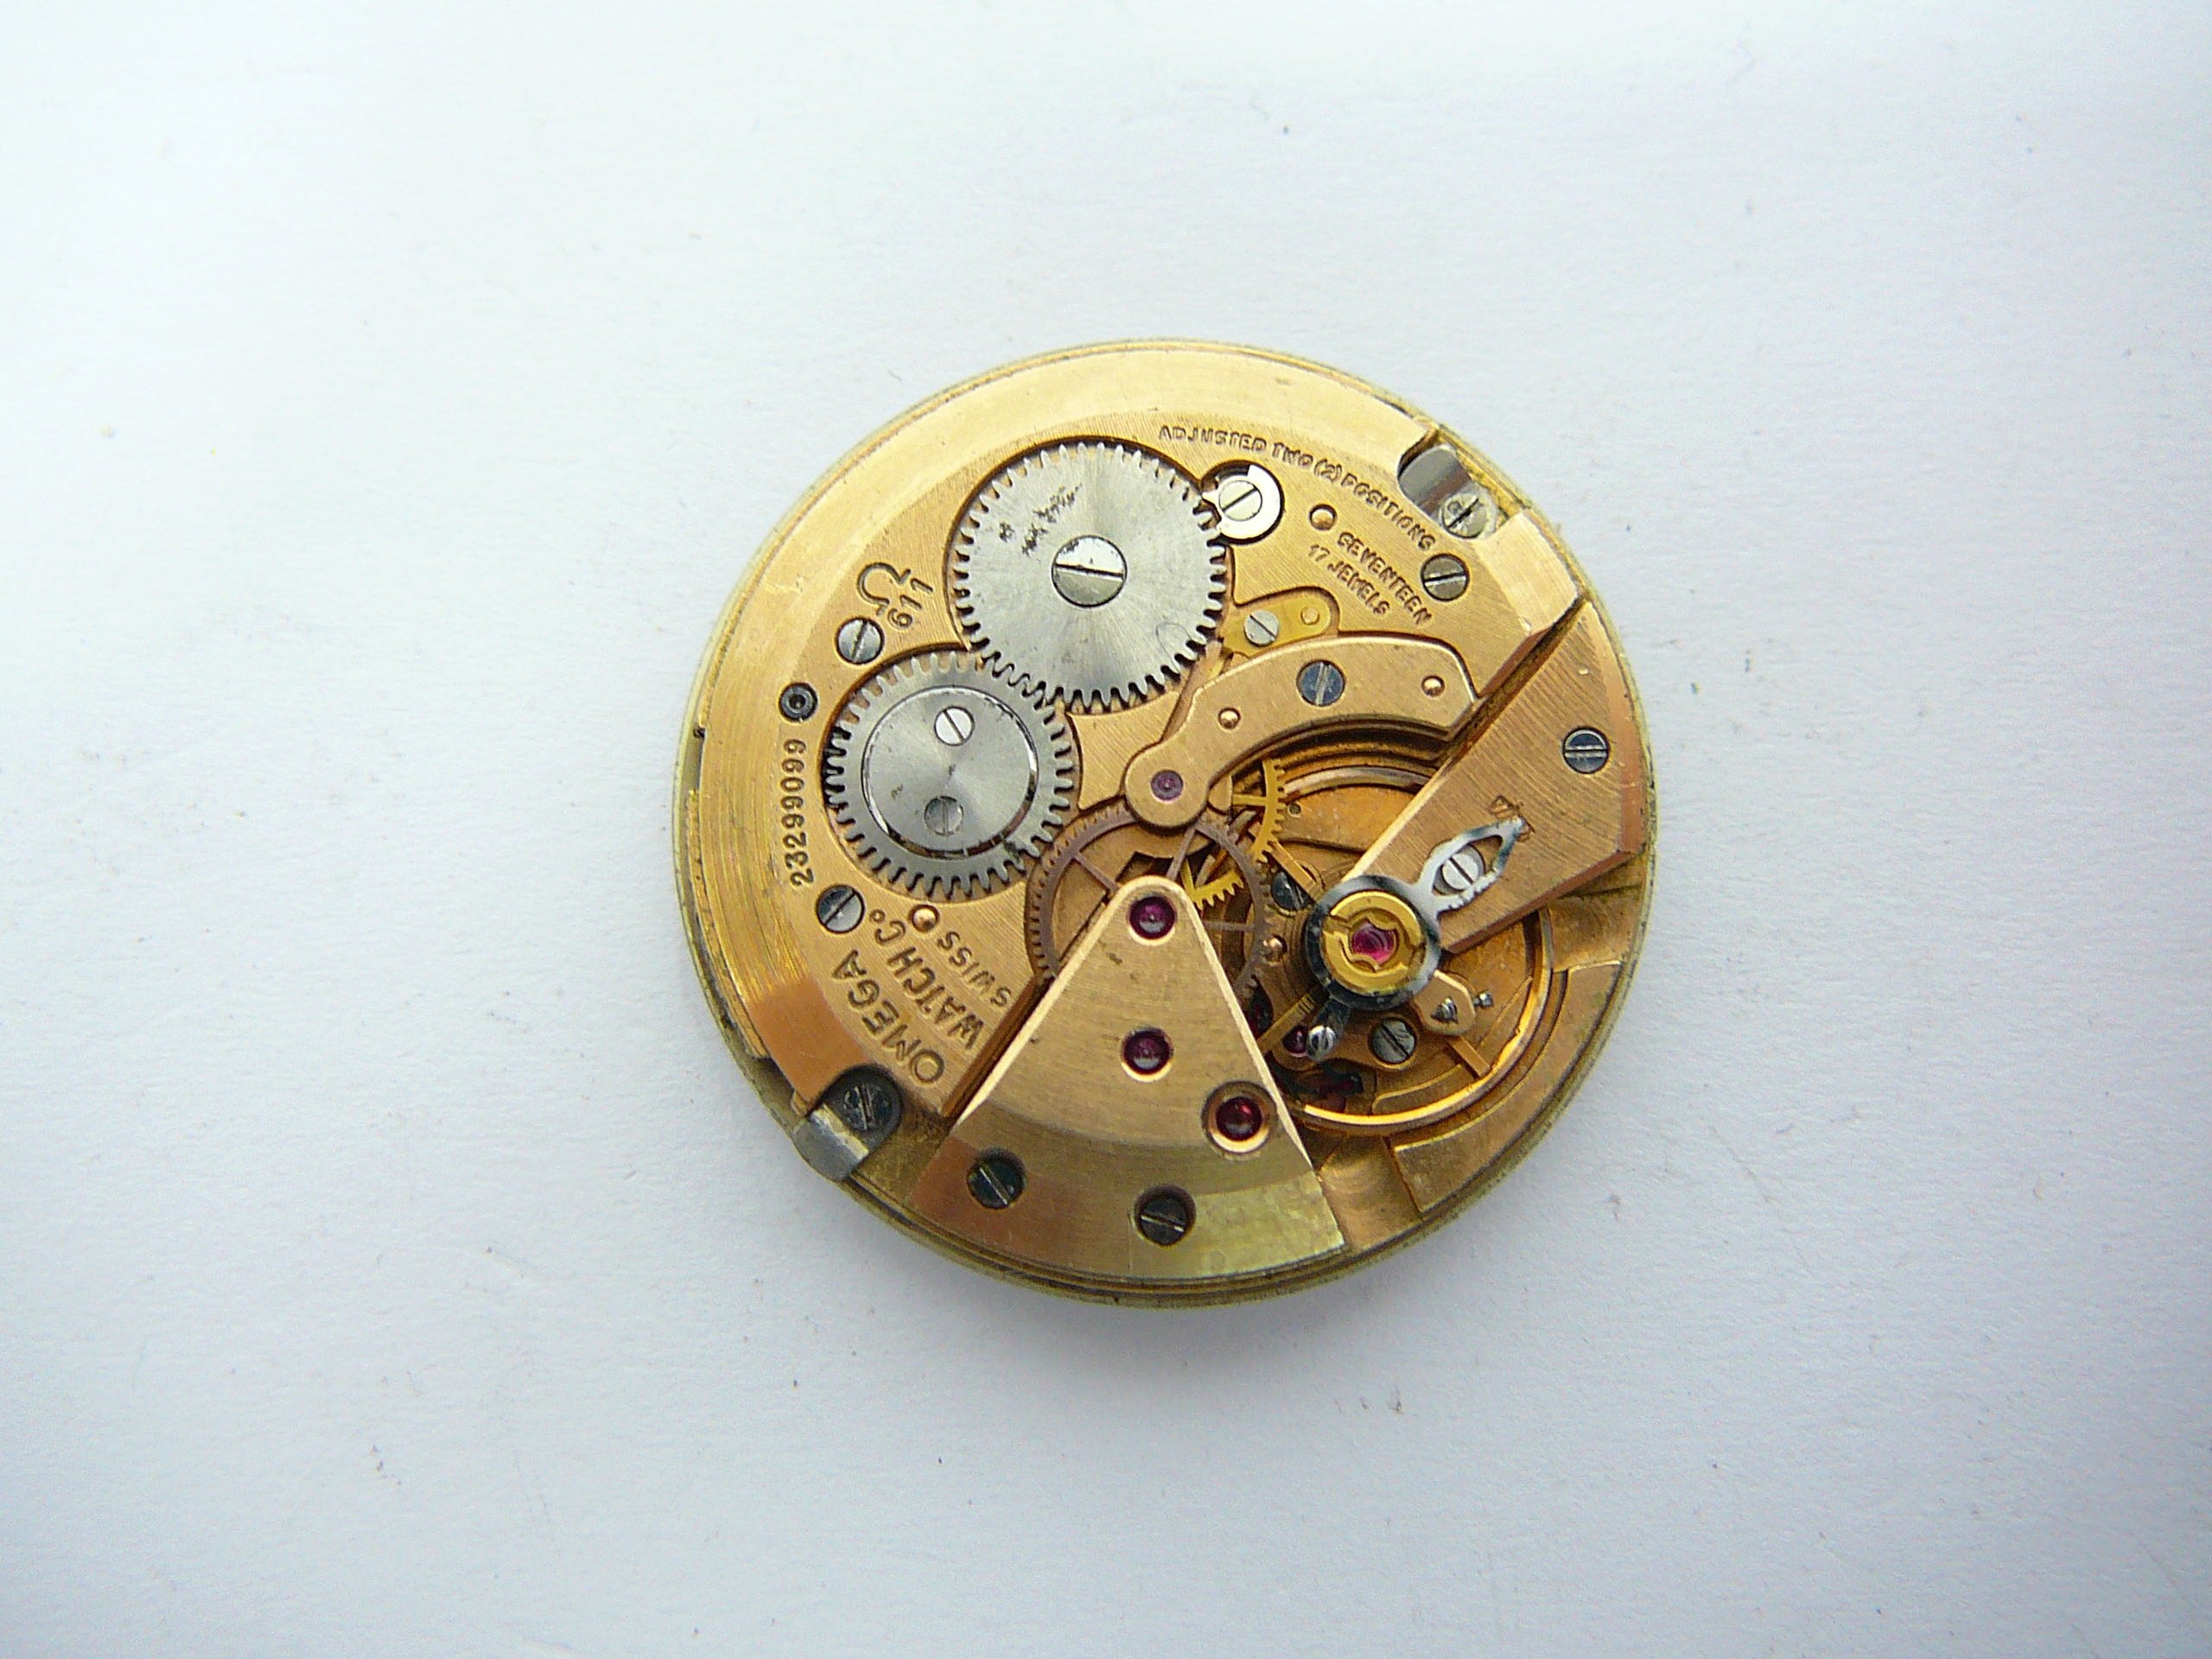 Gents Omega watch movement Cal 611 - Image 2 of 2